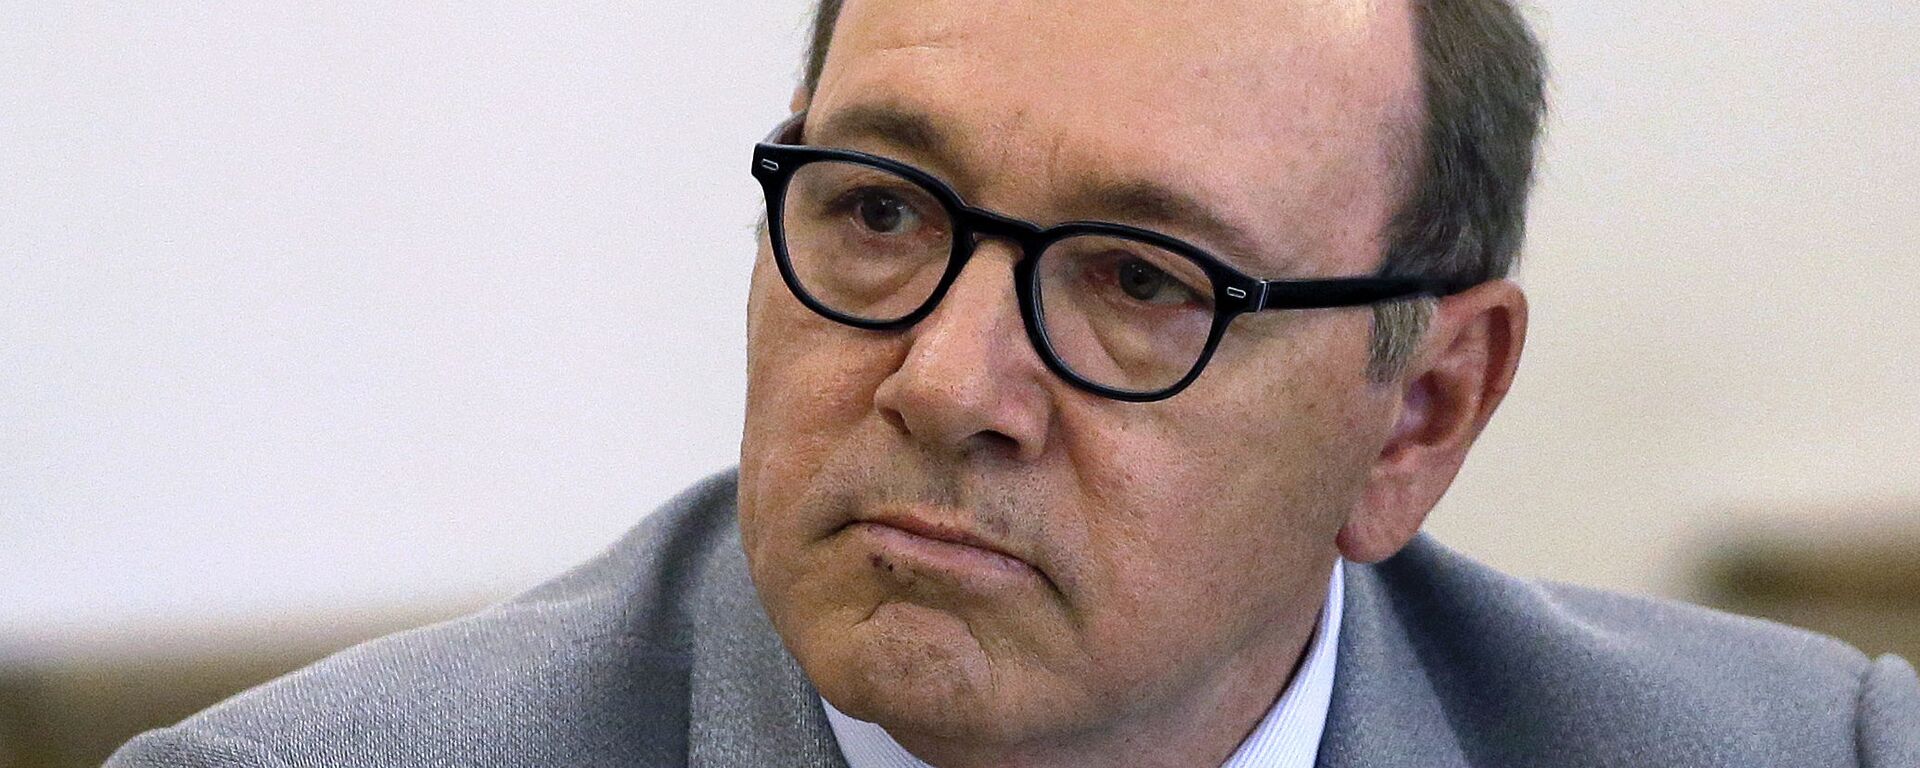 Actor Kevin Spacey attends a pretrial hearing on Monday, June 3, 2019, at district court in Nantucket, Mass. - Sputnik International, 1920, 09.04.2022